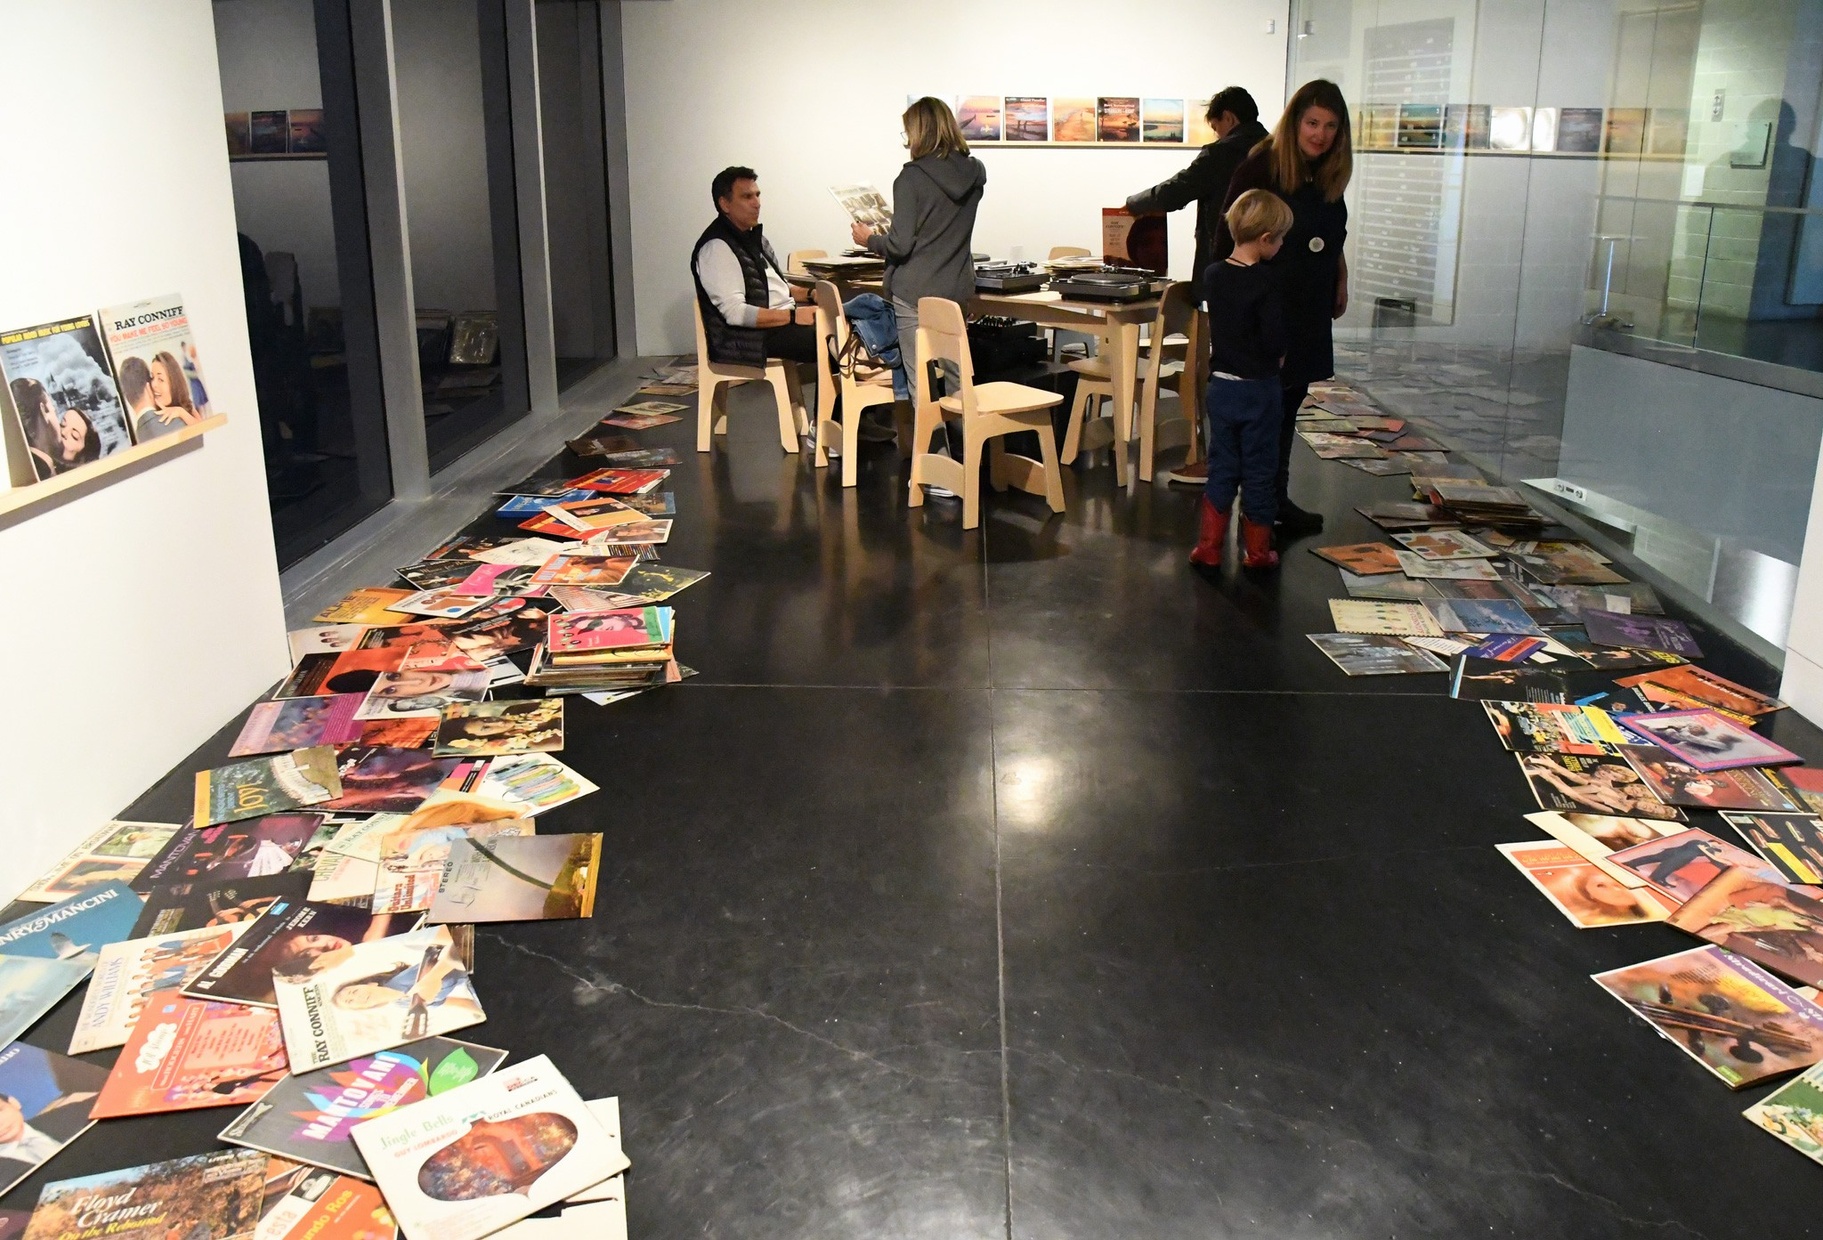 A group of light-skinned people gather around a wooden table with wooden chairs in a narrow room. Rows of vinyls hang on the walls and vinyls lay scattered on the floor around the edges of the room.